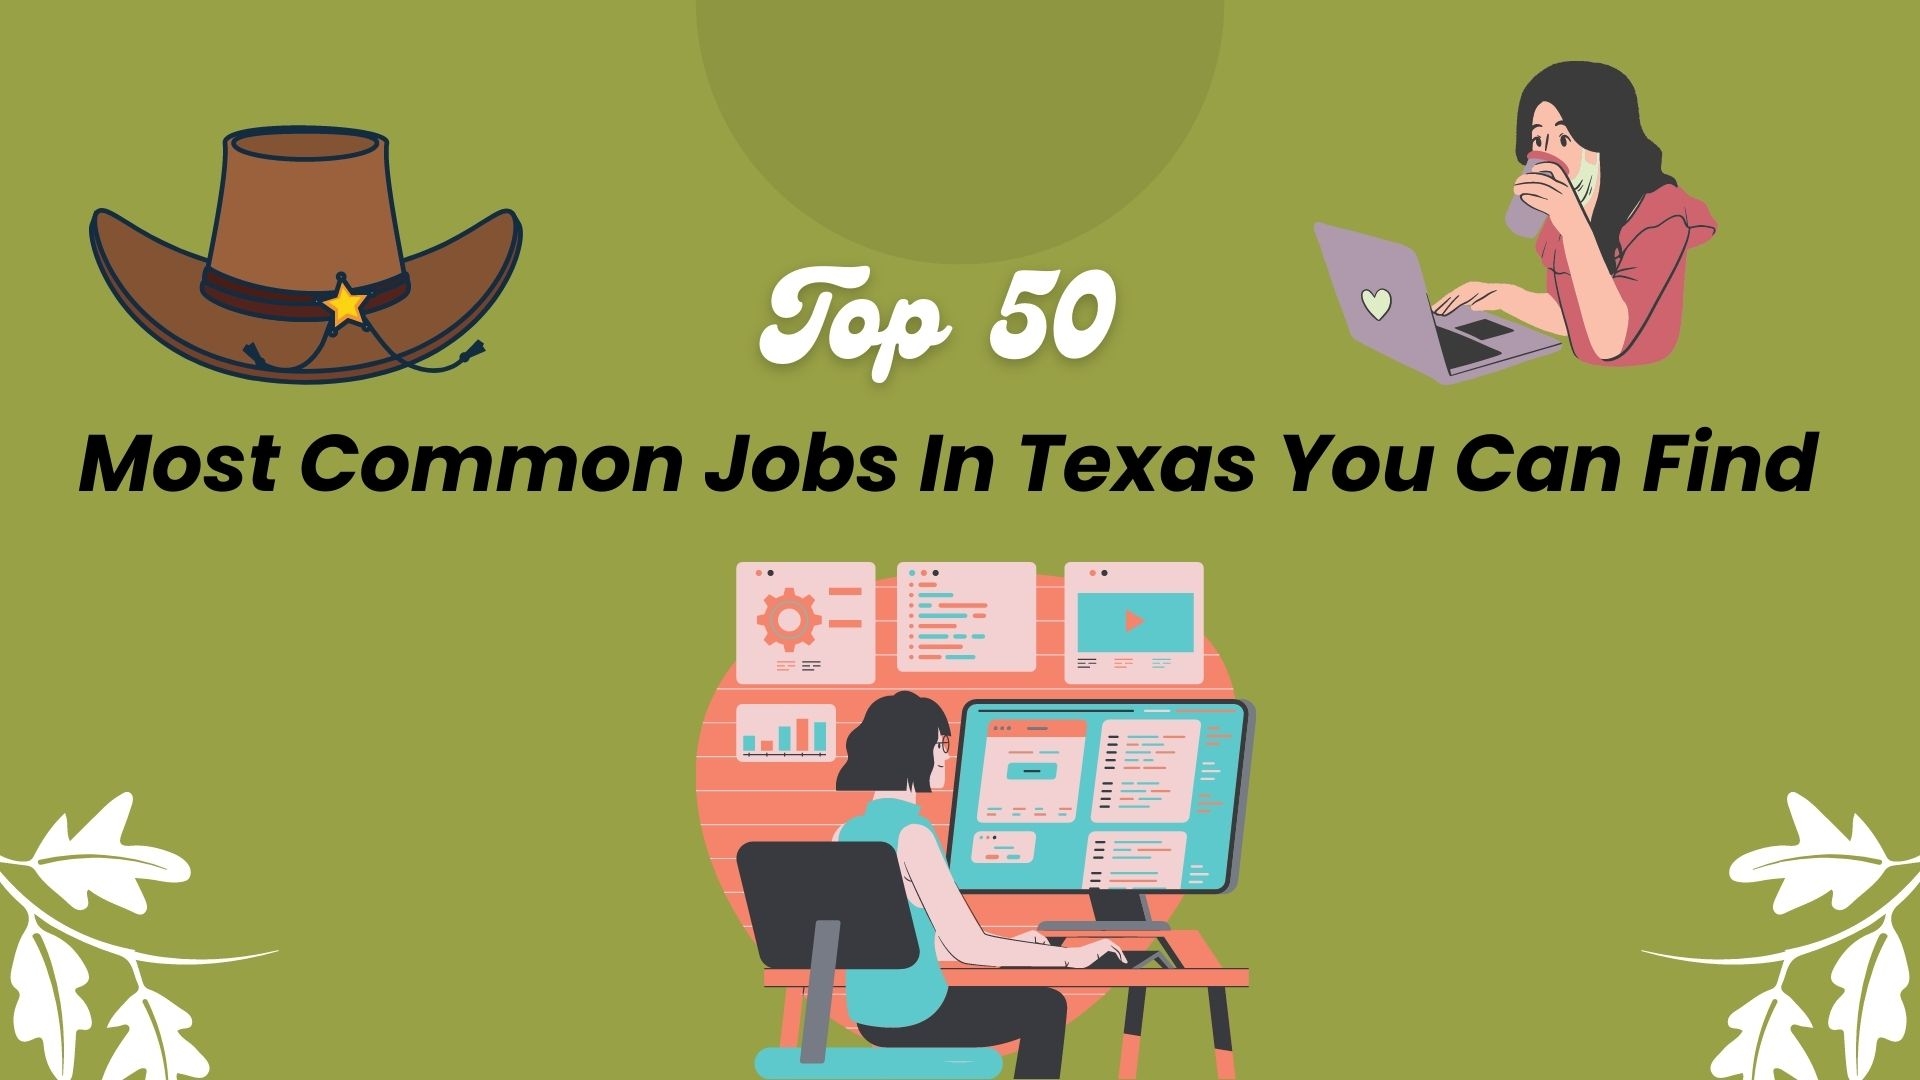 Top 50 Most Common Jobs In Texas You Can Find 